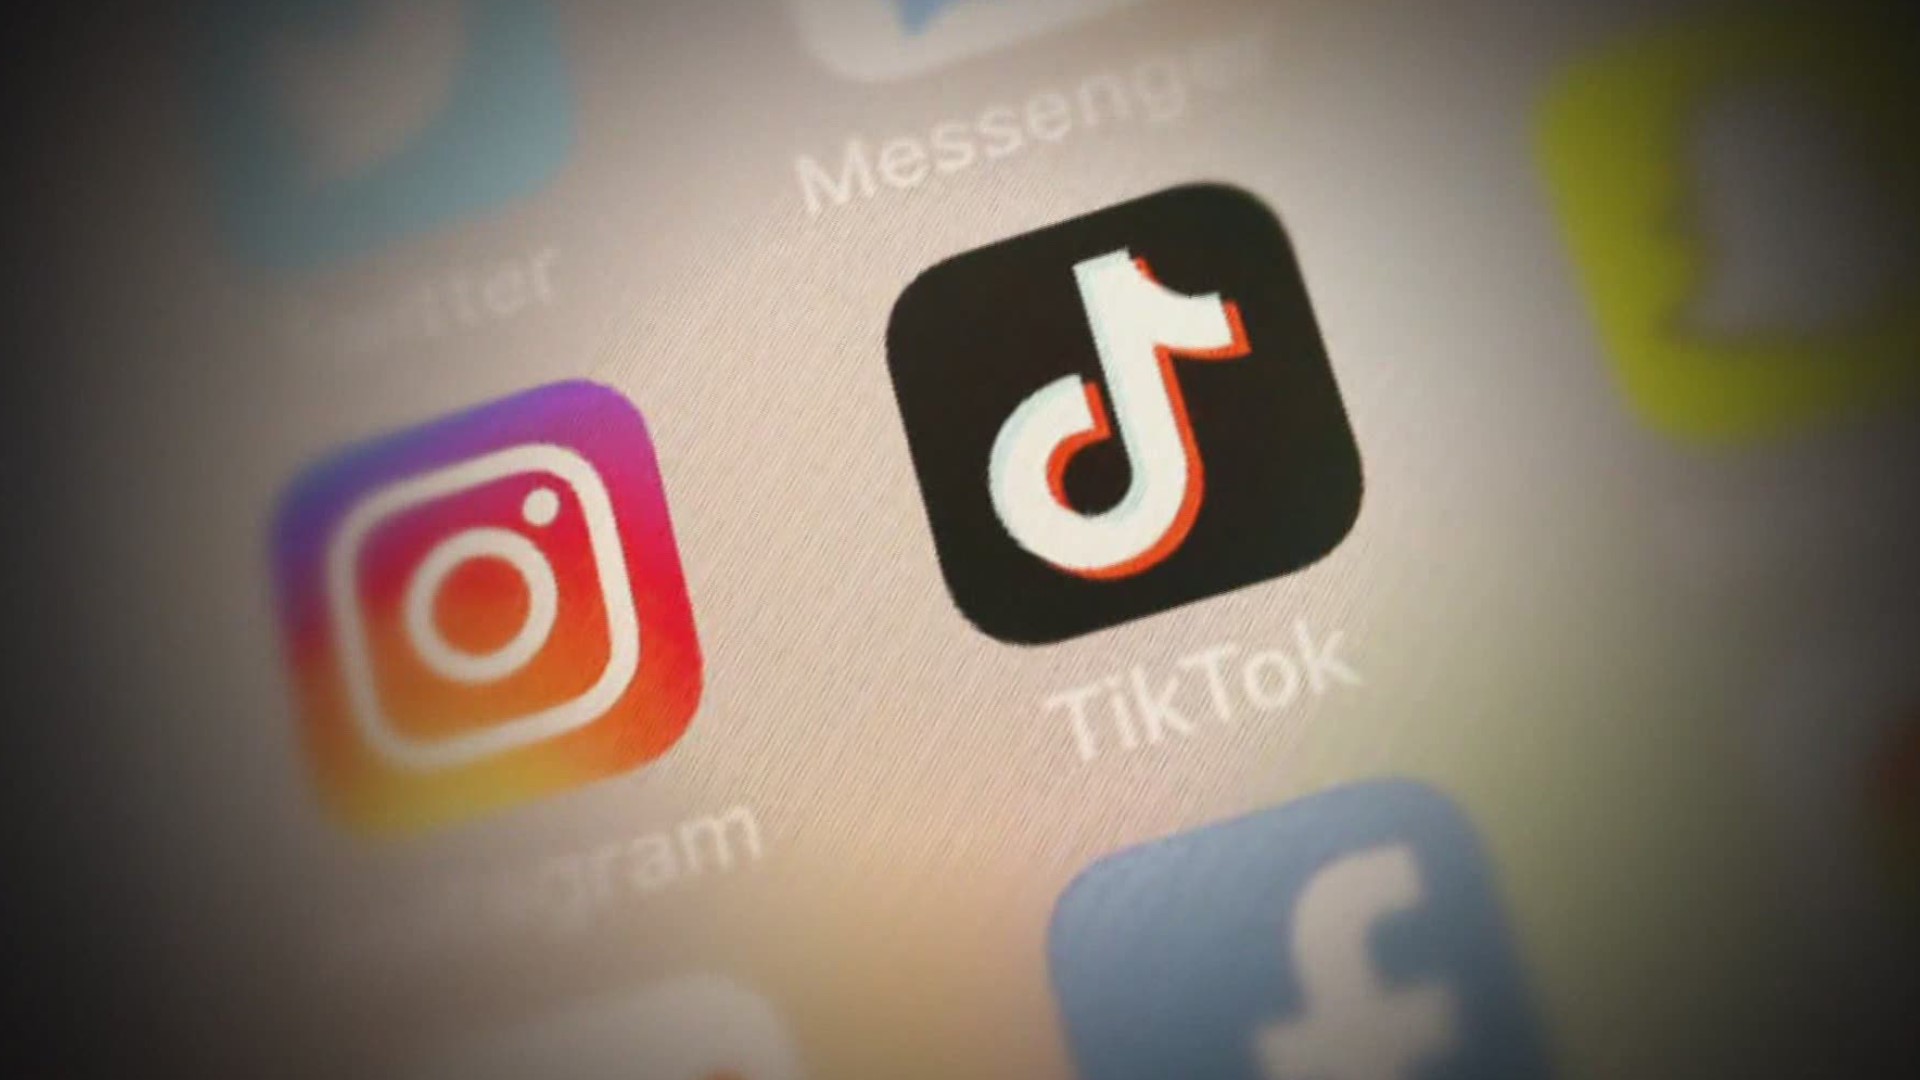 President Trump is threatening to ban the Chinese-owned app TikTok.